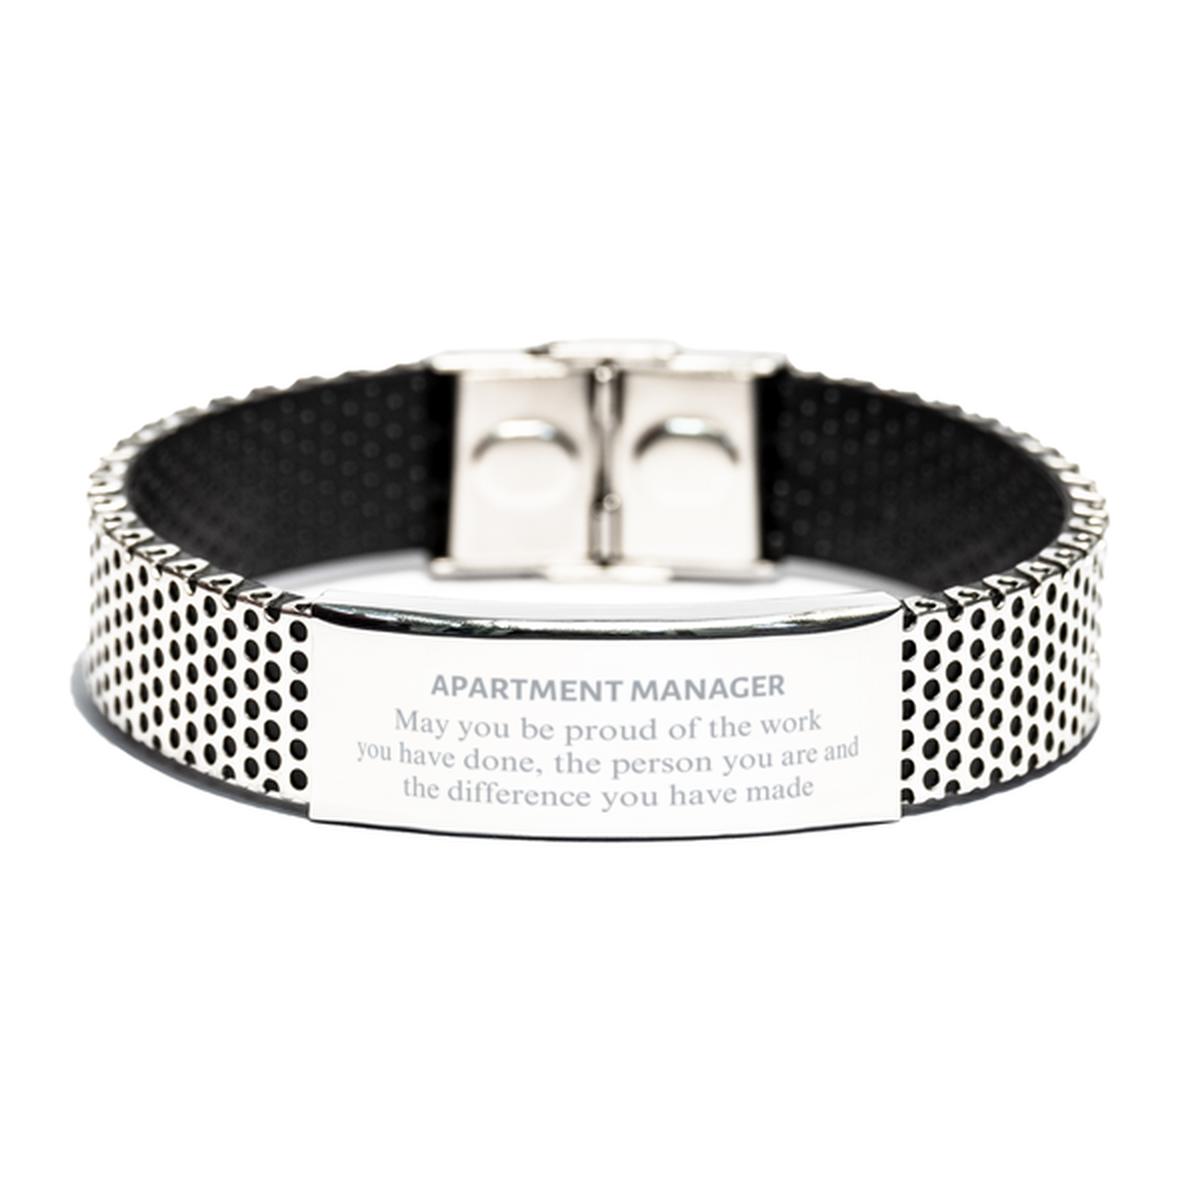 Apartment Manager May you be proud of the work you have done, Retirement Apartment Manager Stainless Steel Bracelet for Colleague Appreciation Gifts Amazing for Apartment Manager